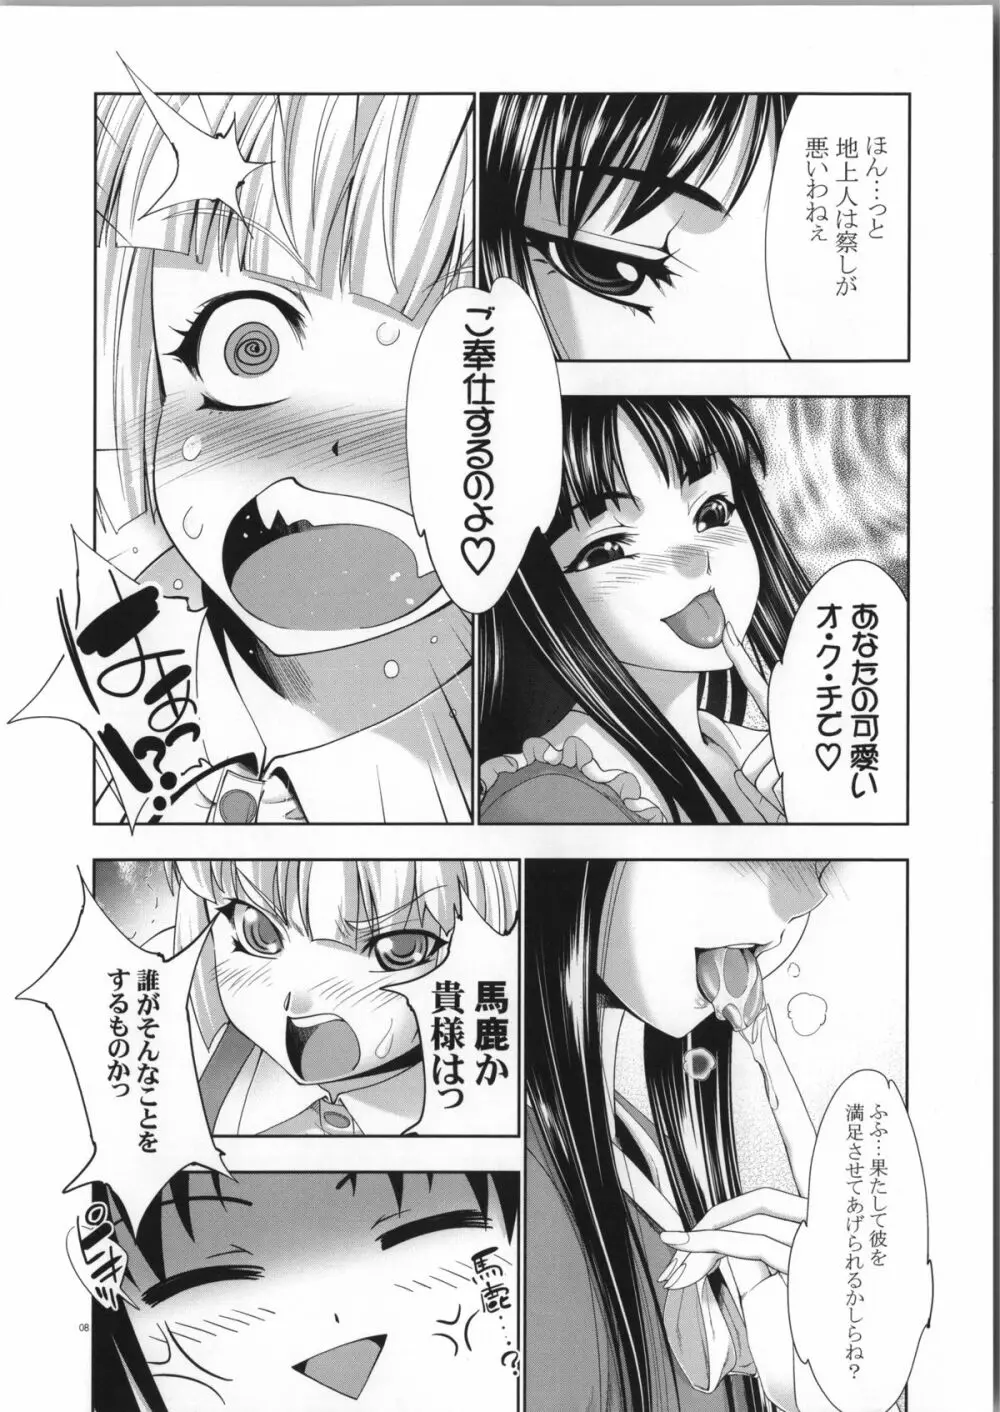 sperma card attack!! 永夜抄 妹紅編 SP Page.15